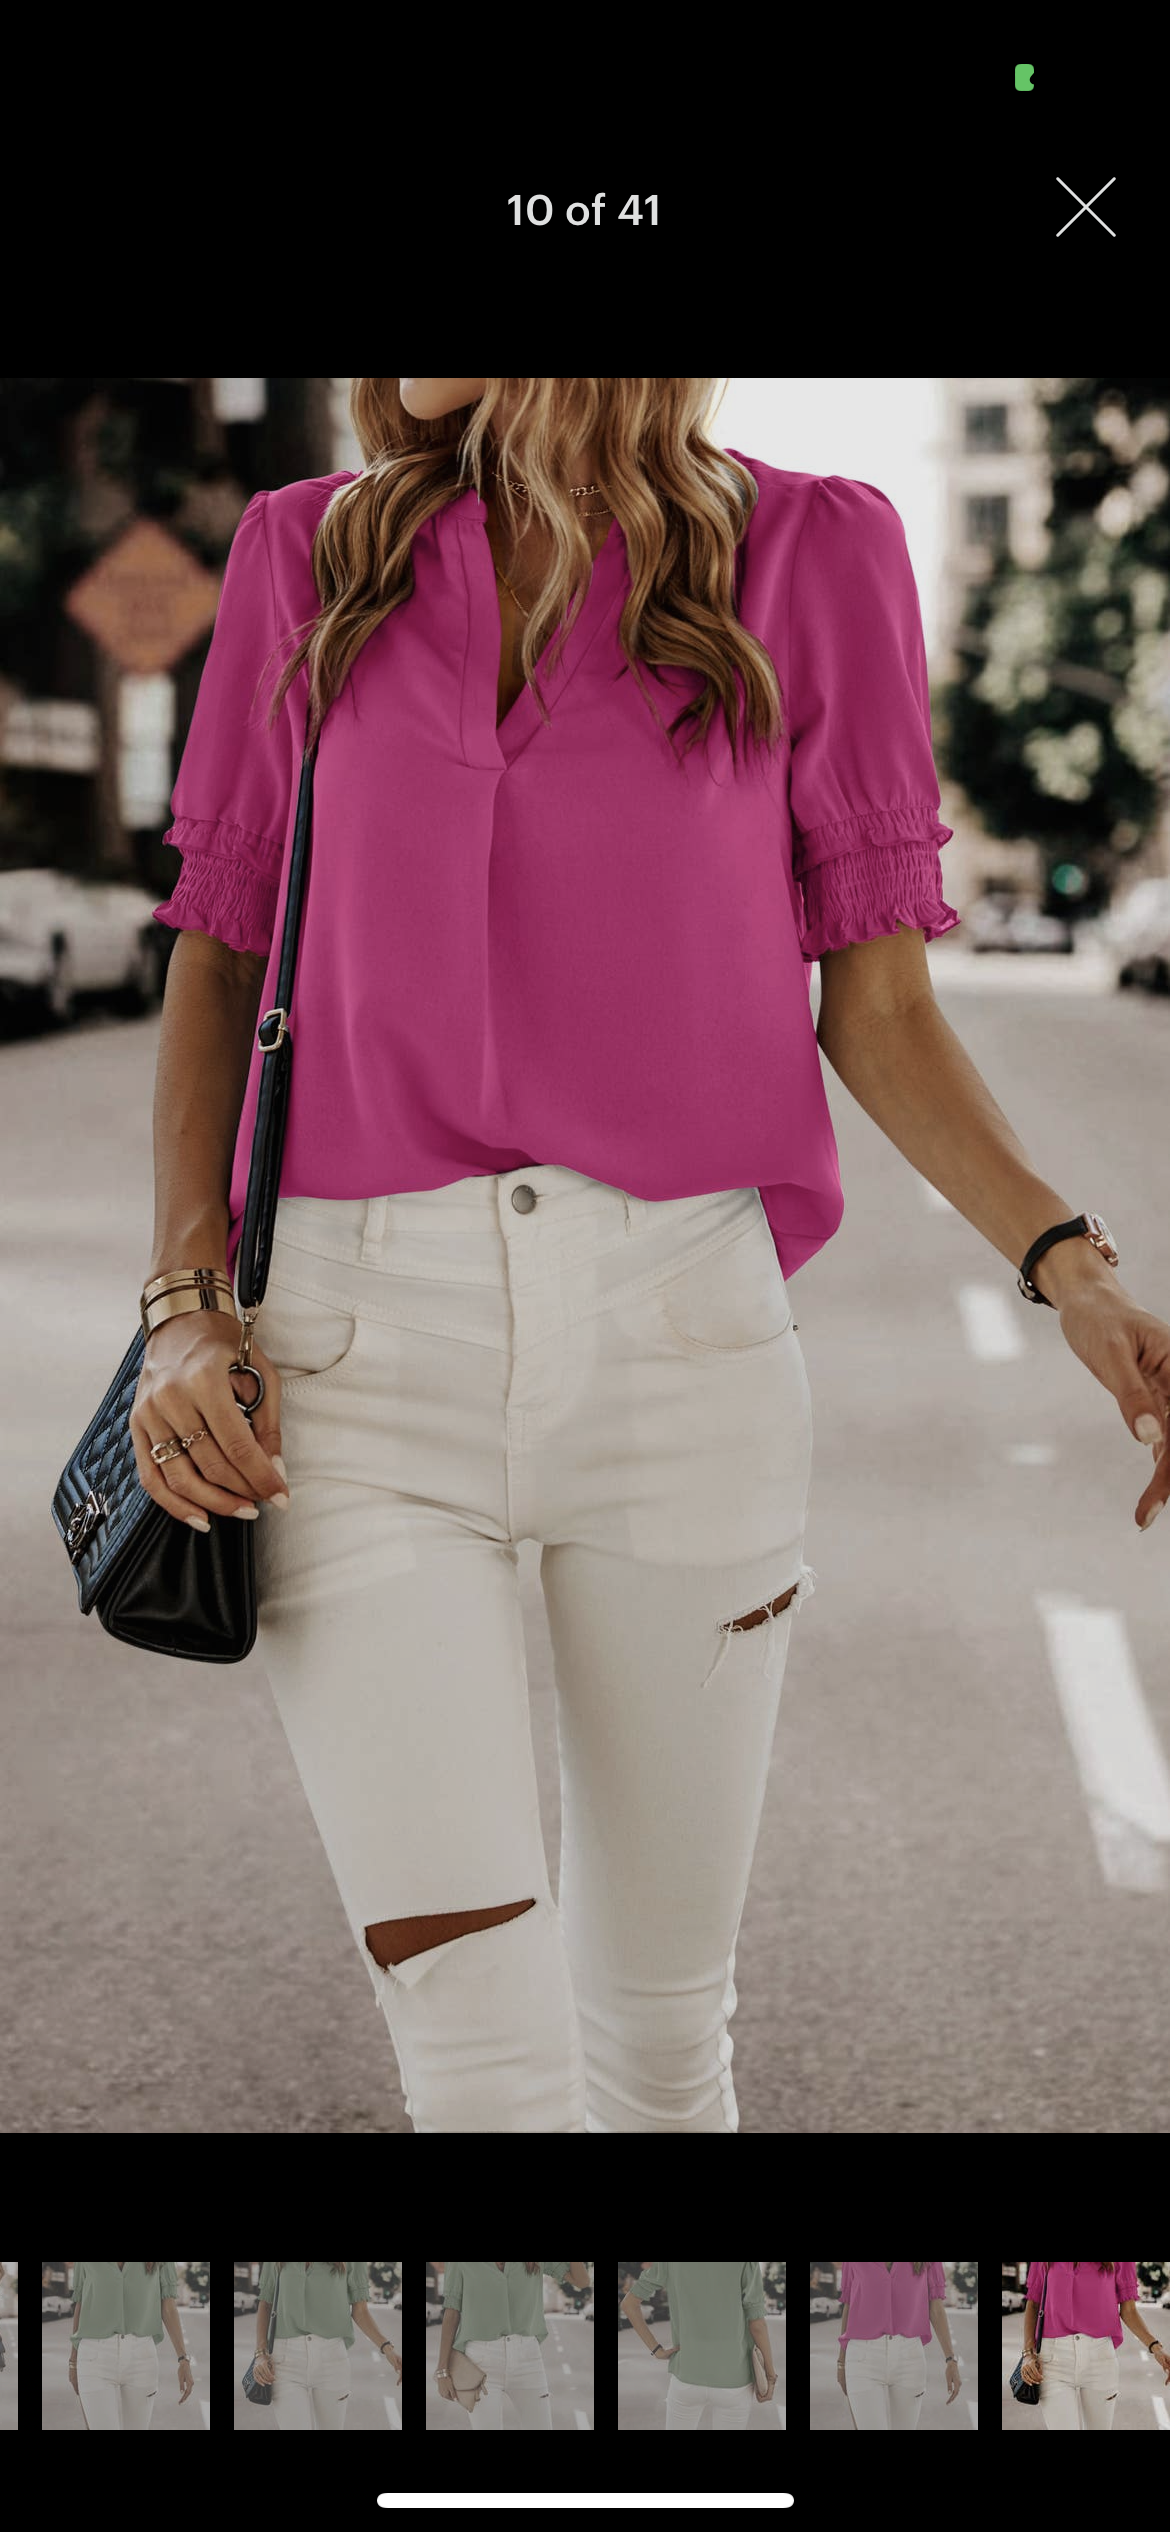 Hot pink blouse